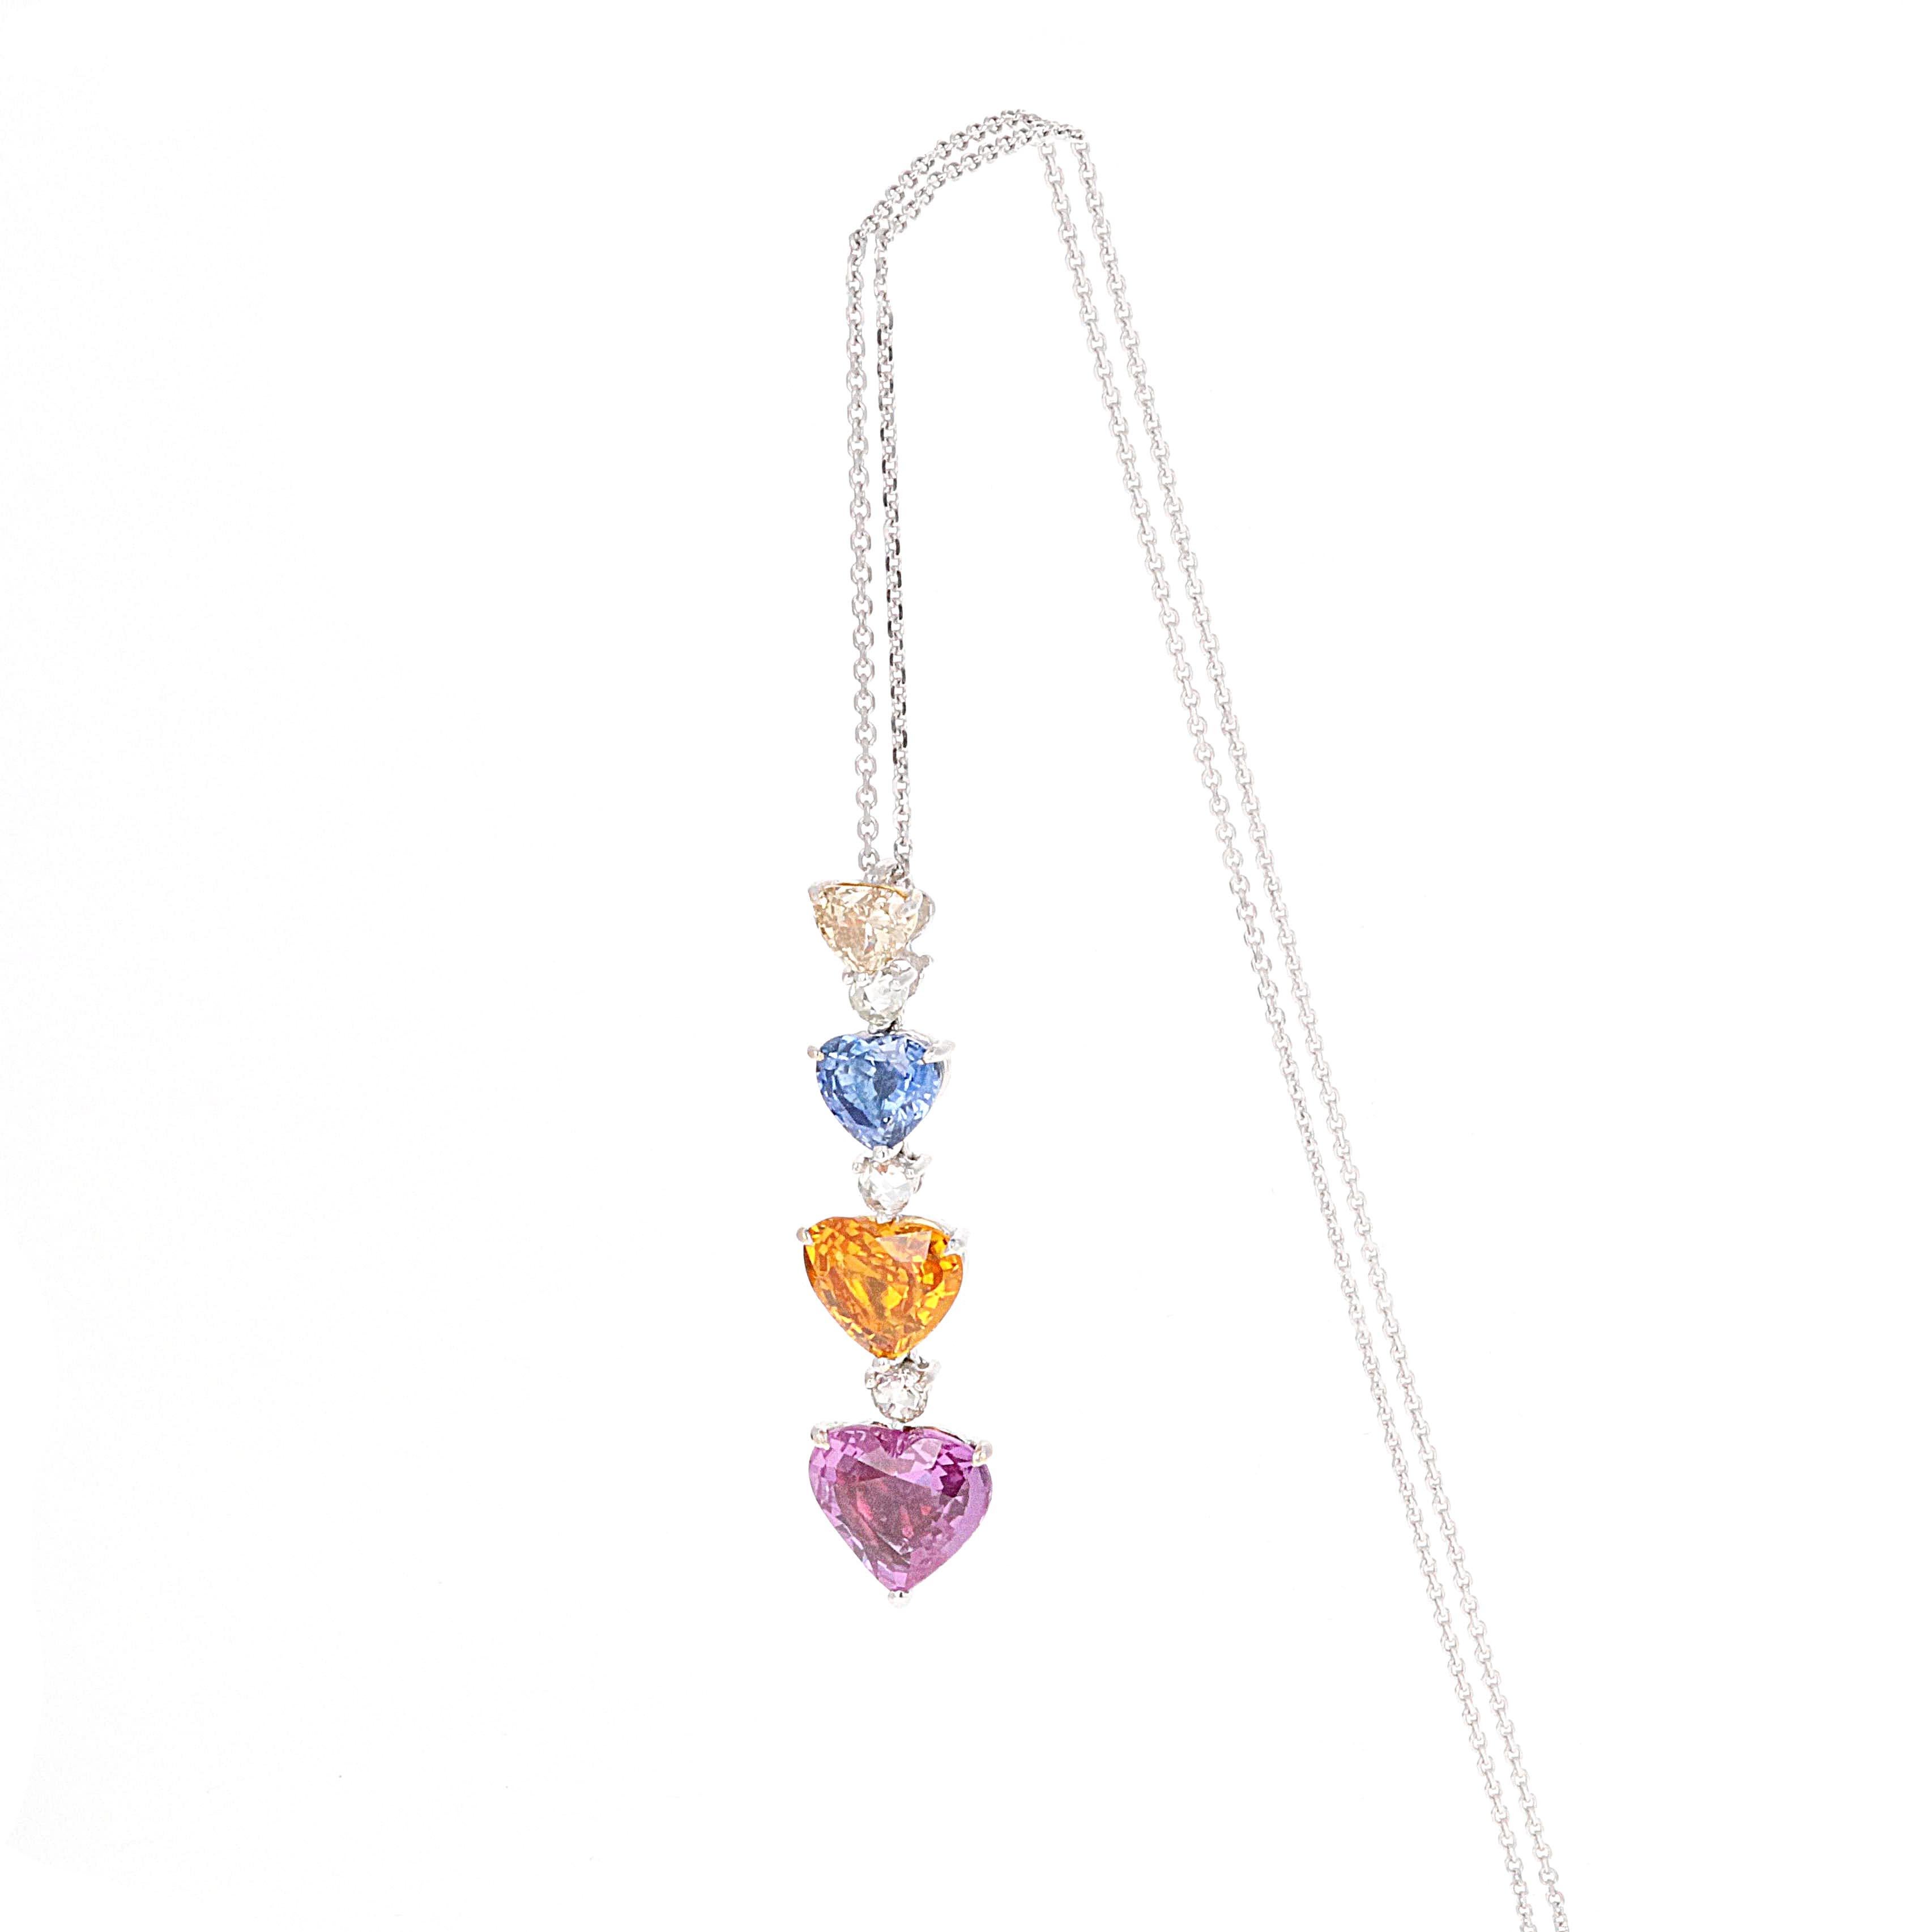 GIA Certified, 18 karat white gold diamond and multi color heart shape sapphire pendant drop necklace. The pendant is beautifully made with 4 different color diamond and sapphire hearts that are cascading down. Between each sapphire heart is a near